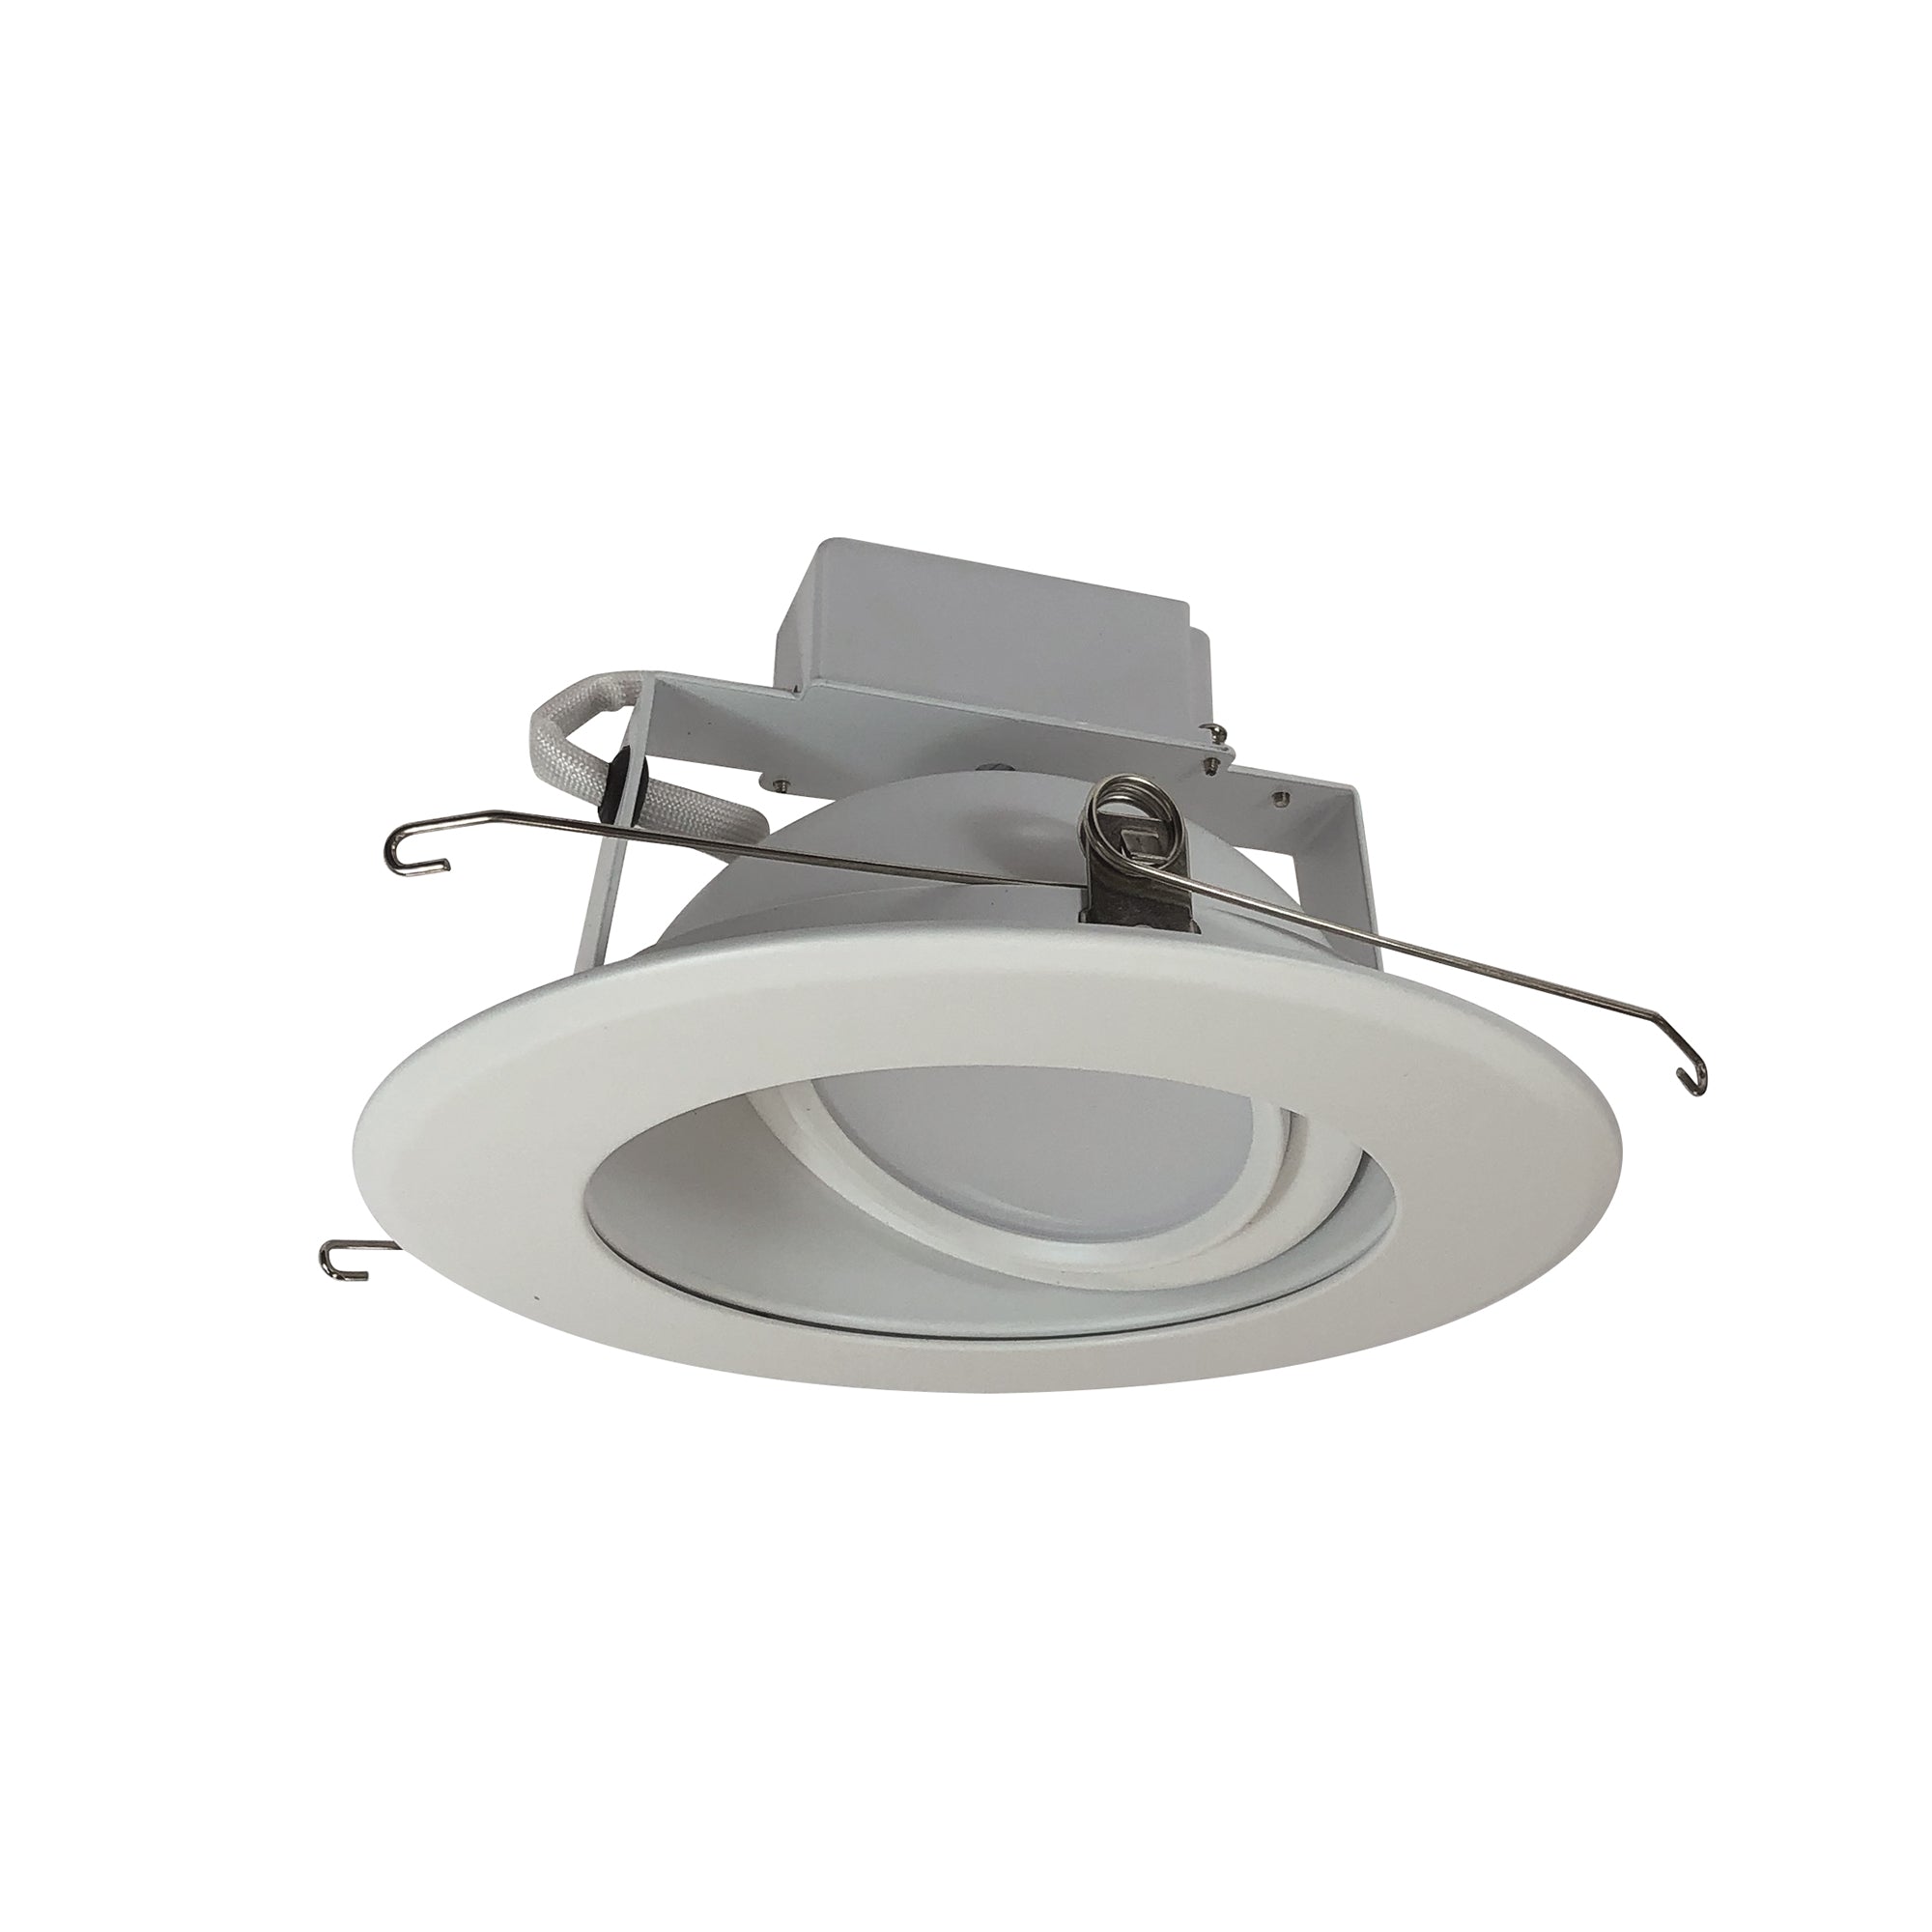 Nora Lighting LE60 - NLCBC-66935XWWLE4 - Recessed - White